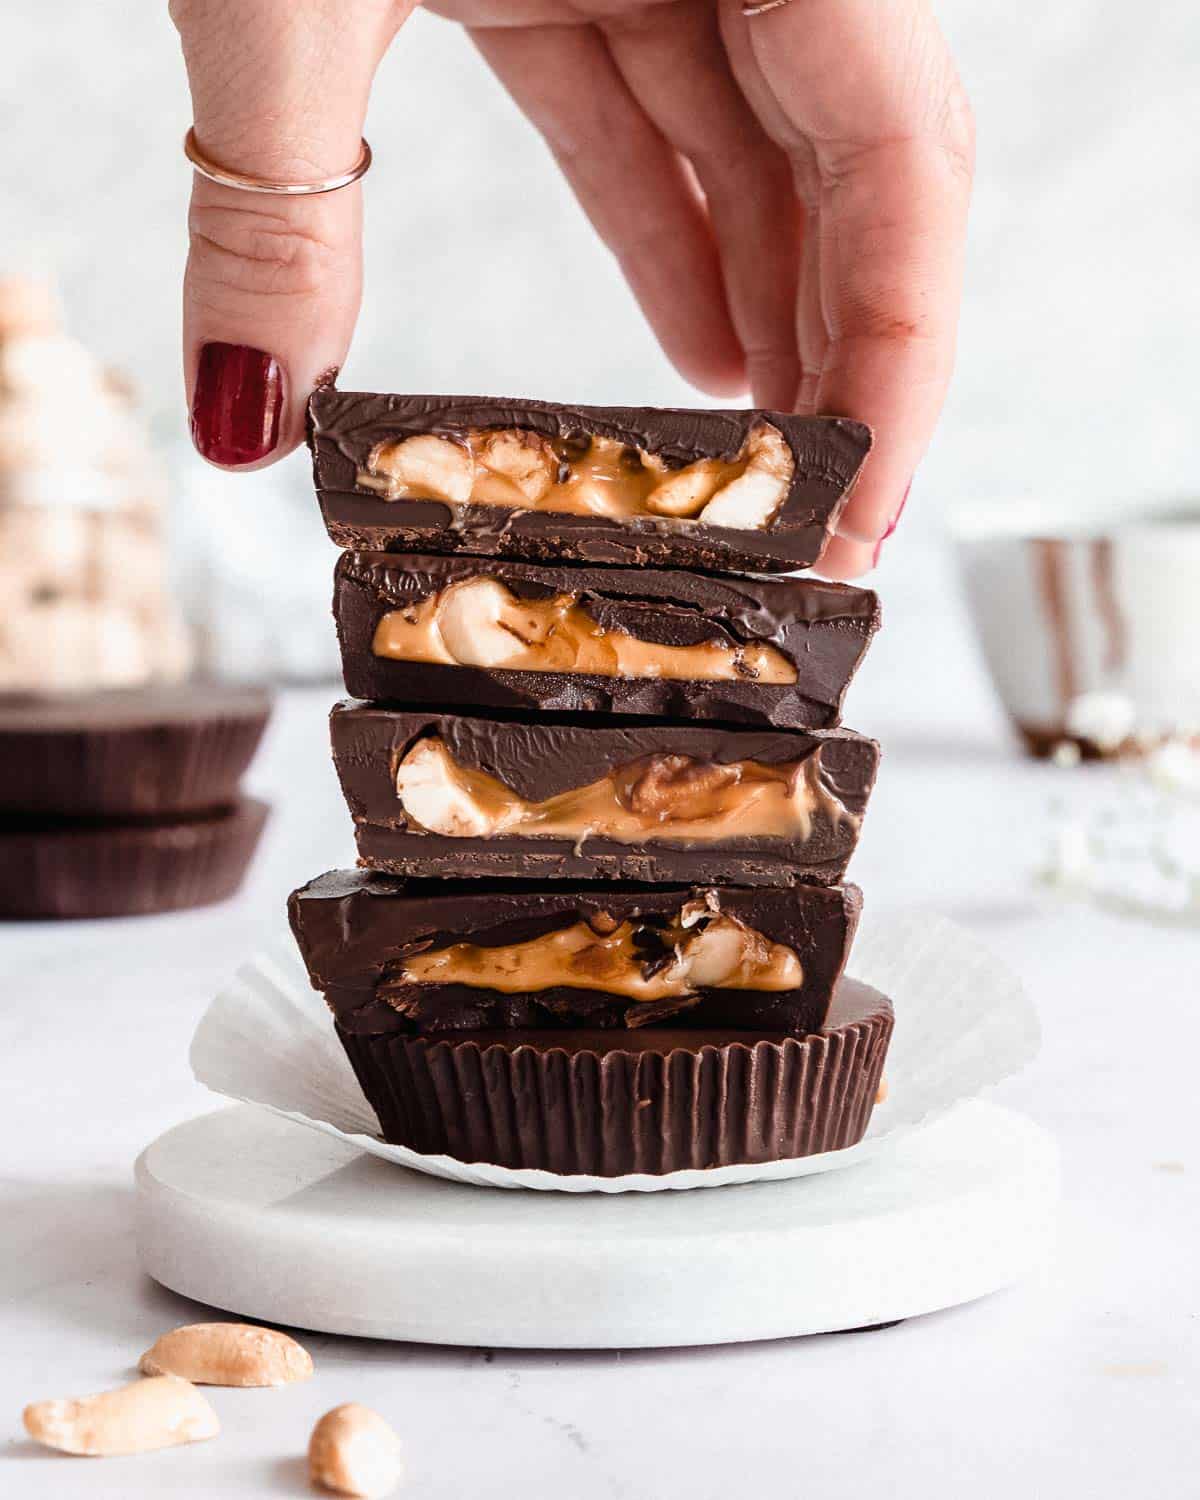 stack of 5 peanut butter cups on a marble plate, one hand lifting off the first cup.